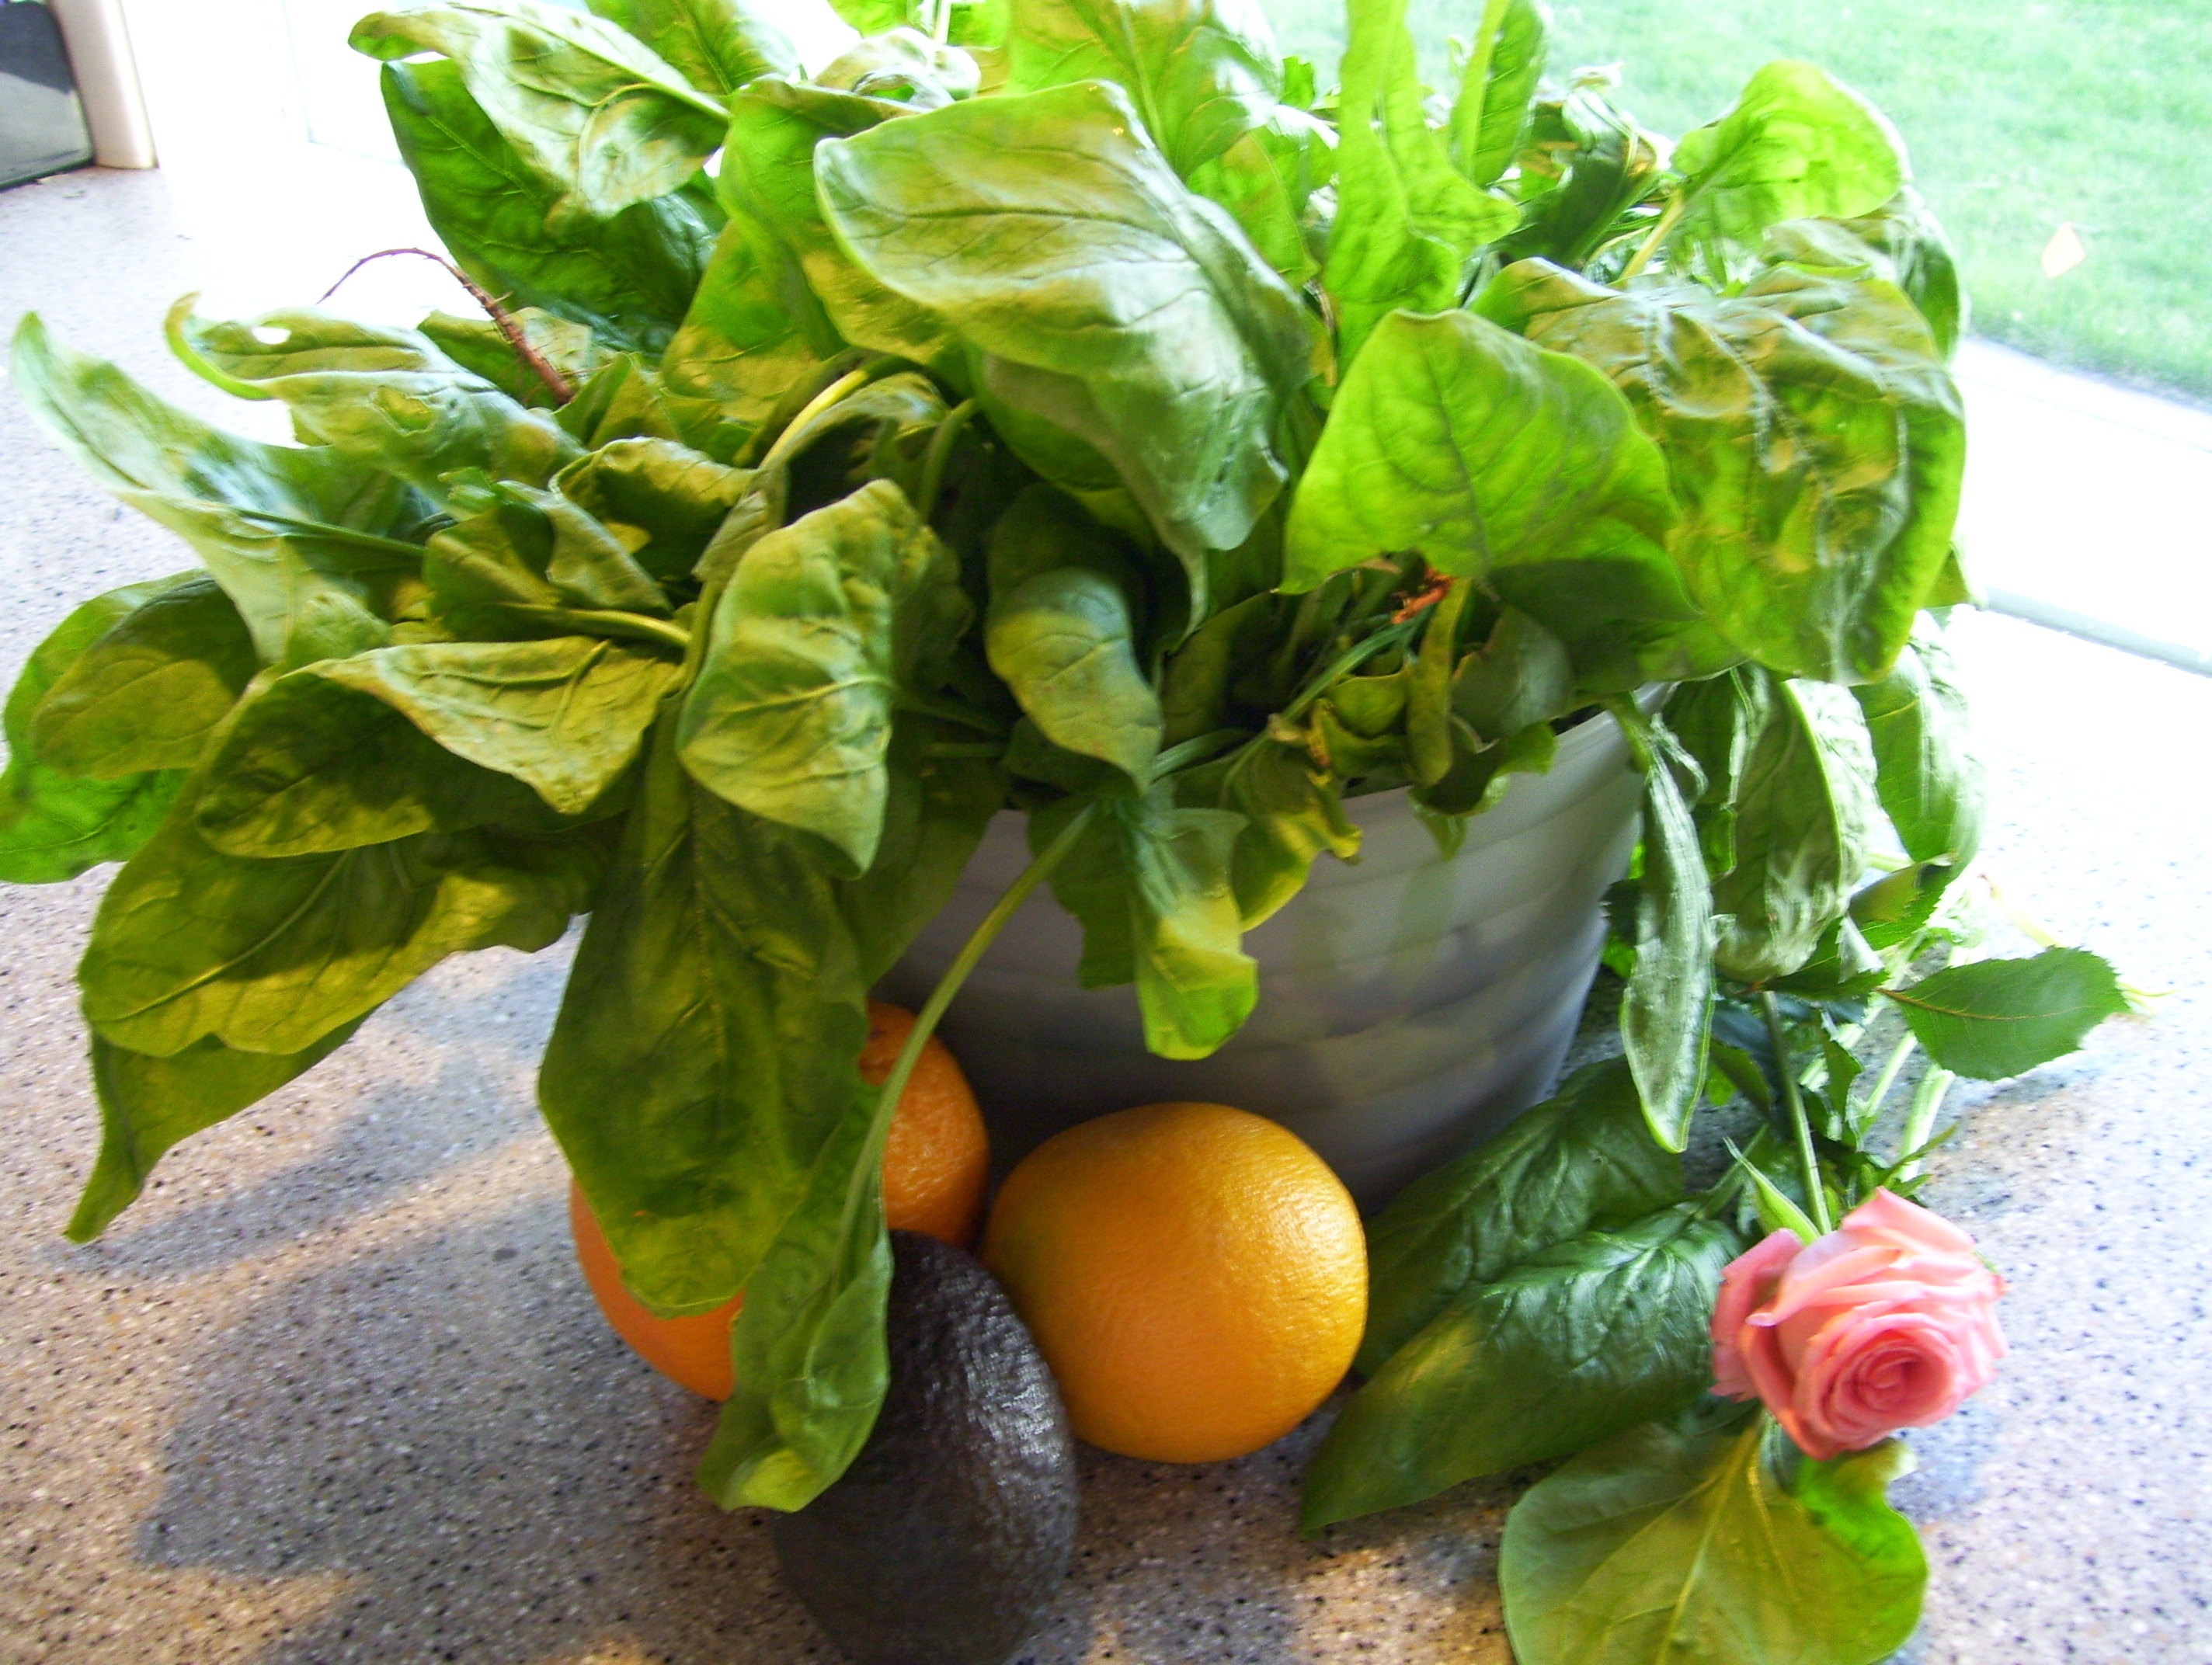 A Spinach Bouquet from the organic farm where my son works